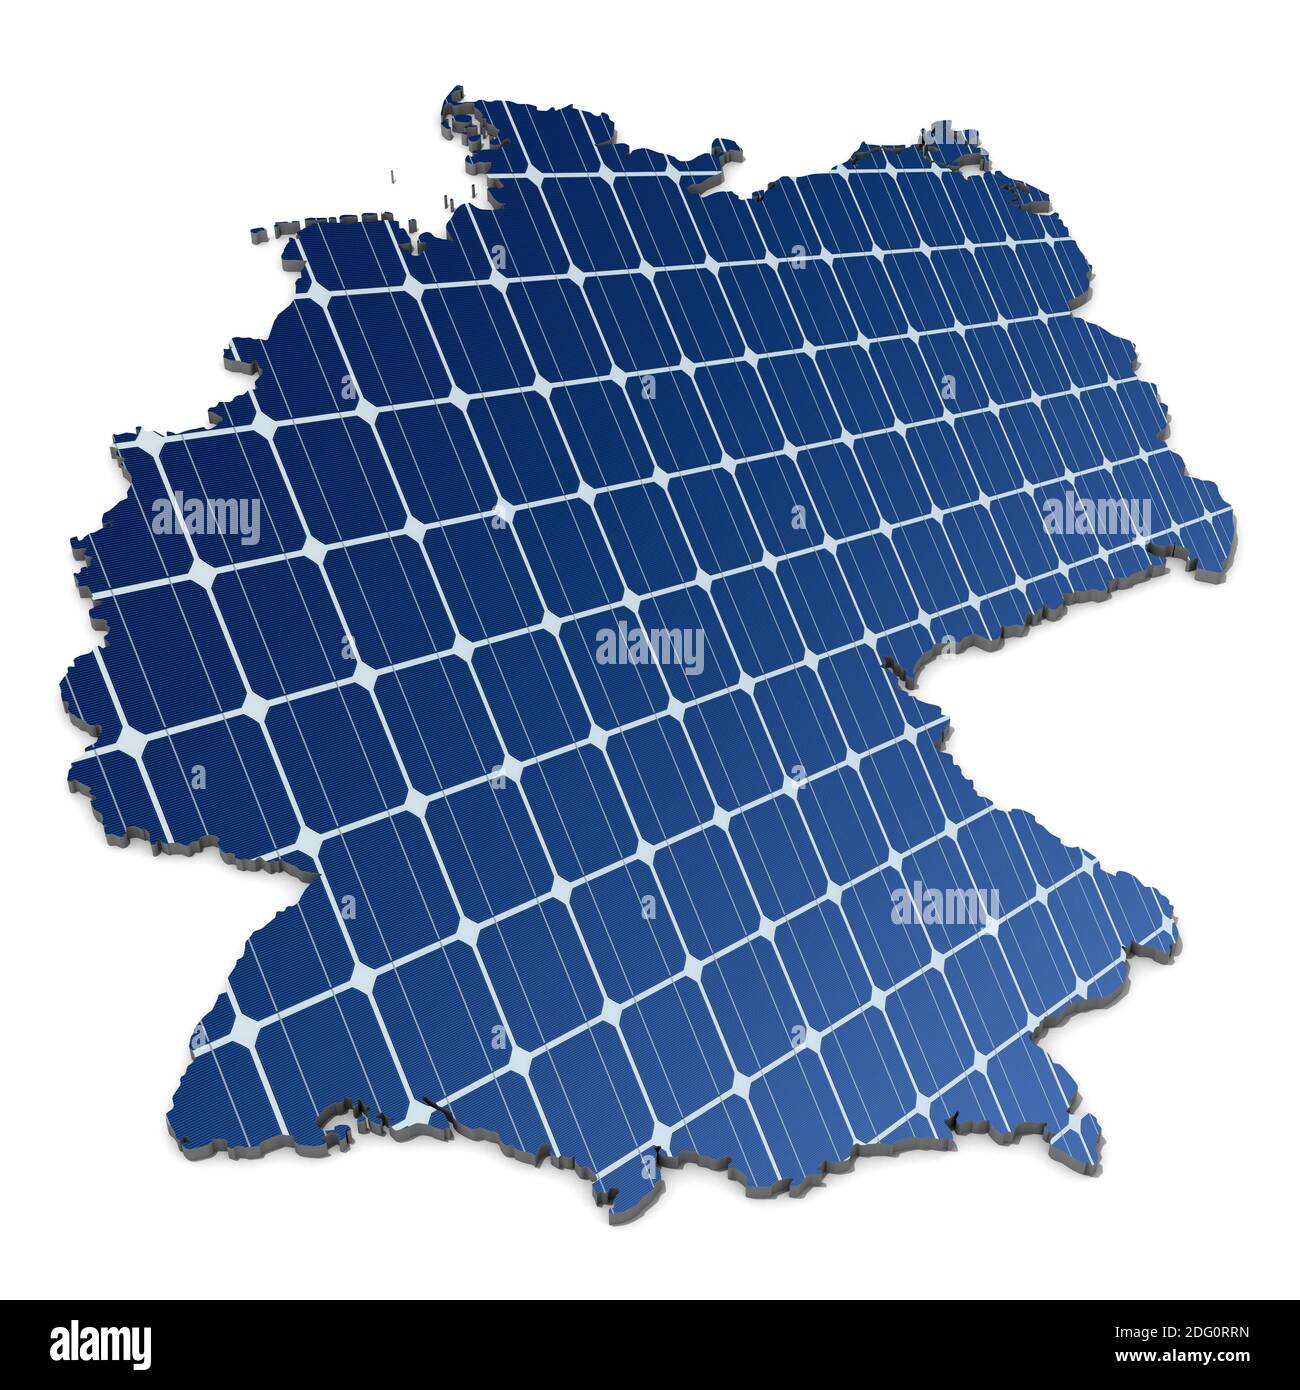 Monocrystalline solar cells in abstract map of Germany Stock Photo